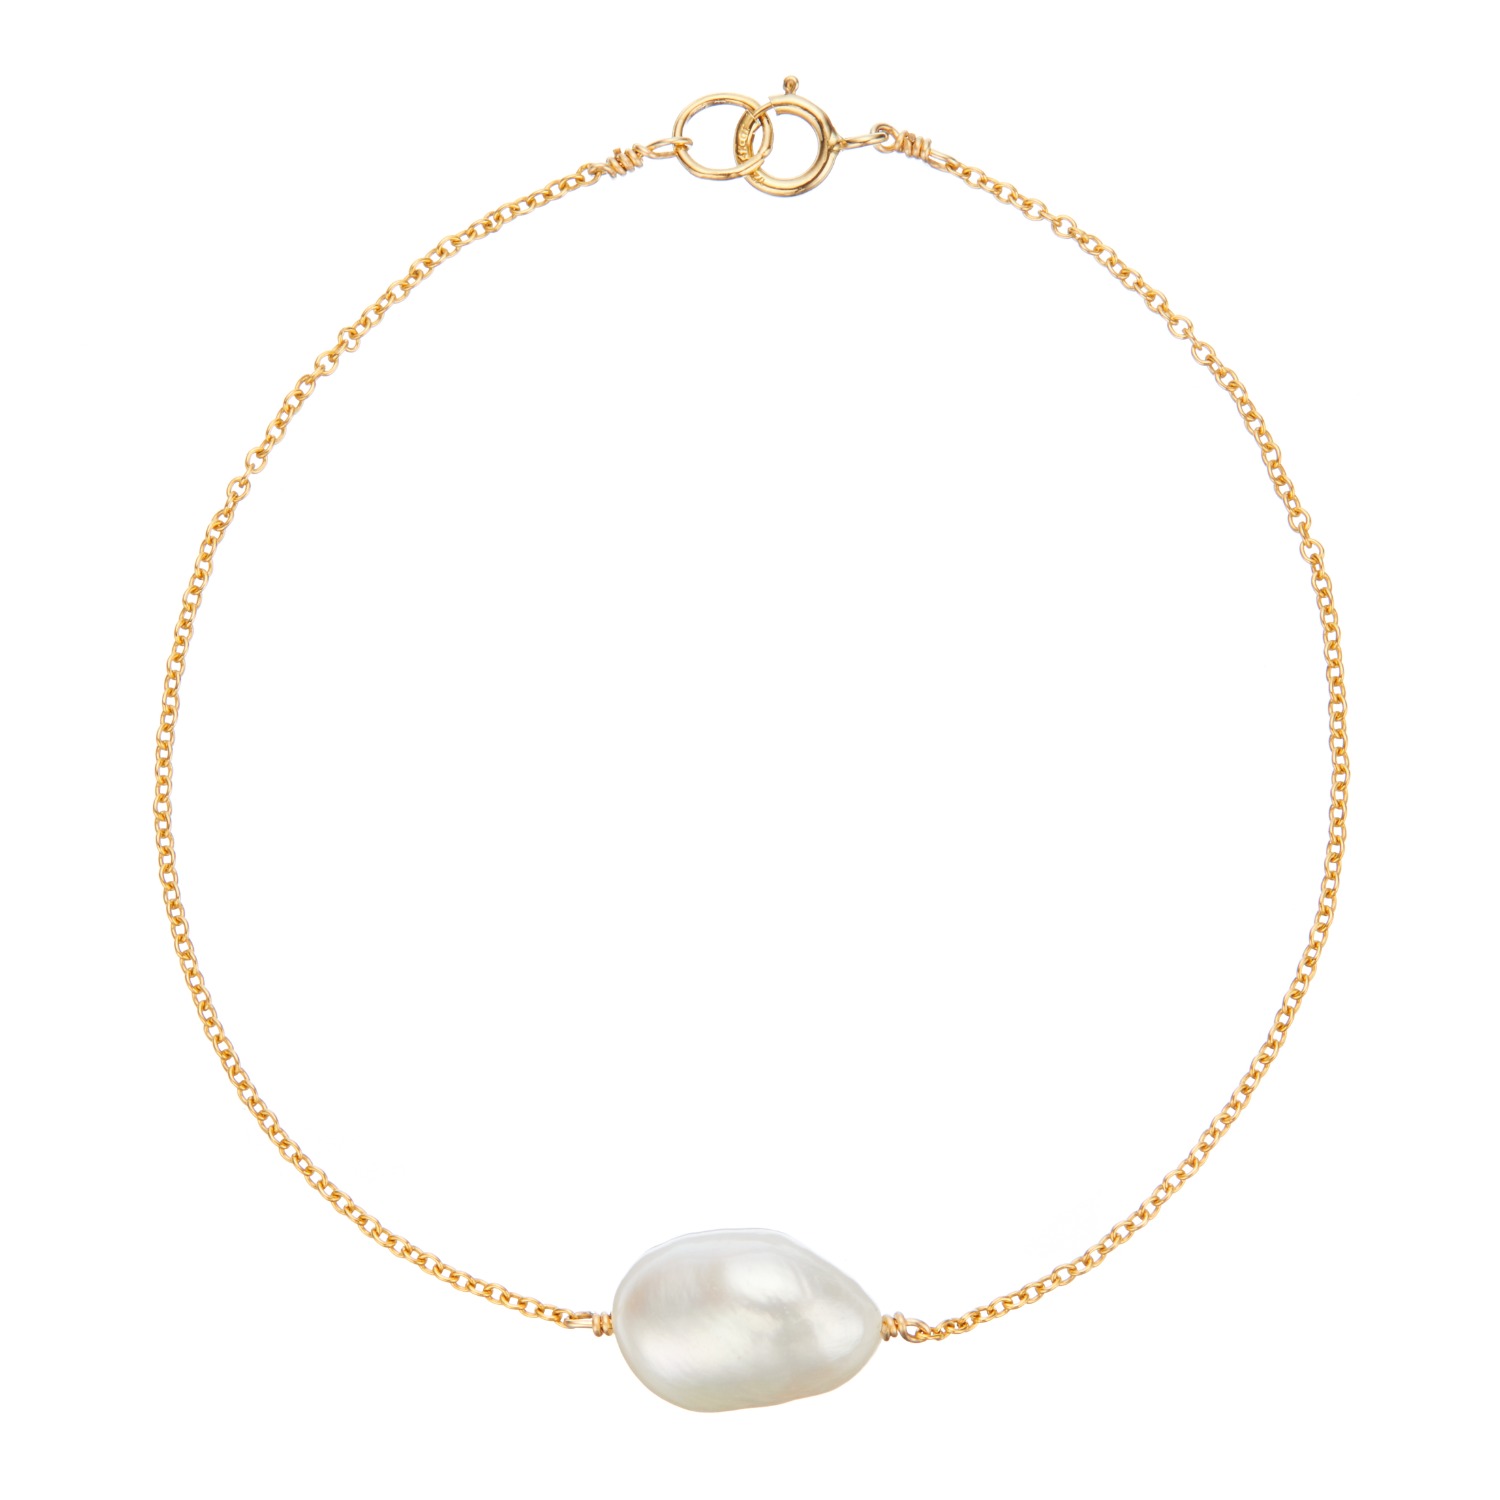 Gold Large Single Pearl Bracelet | Lily & Roo | Wolf & Badger